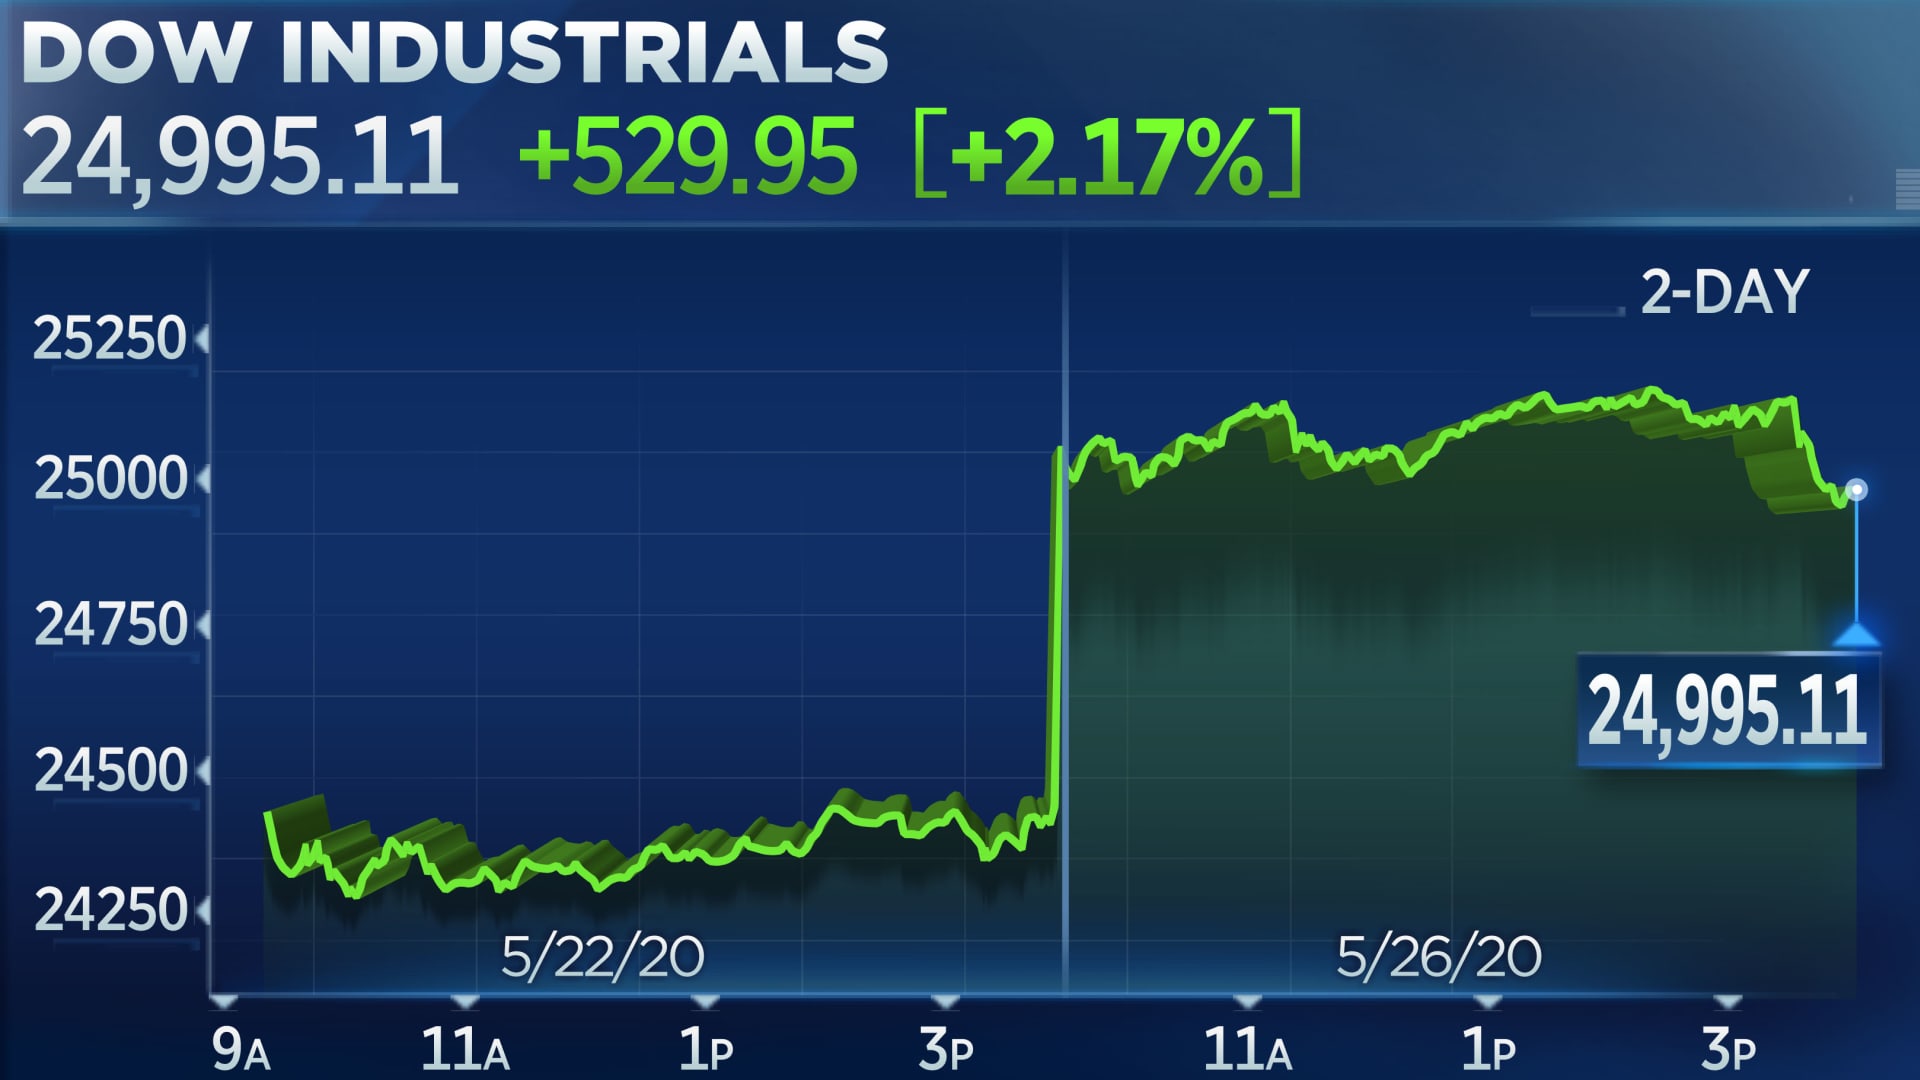 Dow rallies 500 points as Wall Street cheers on the economy reopening, JPMorgan jumps